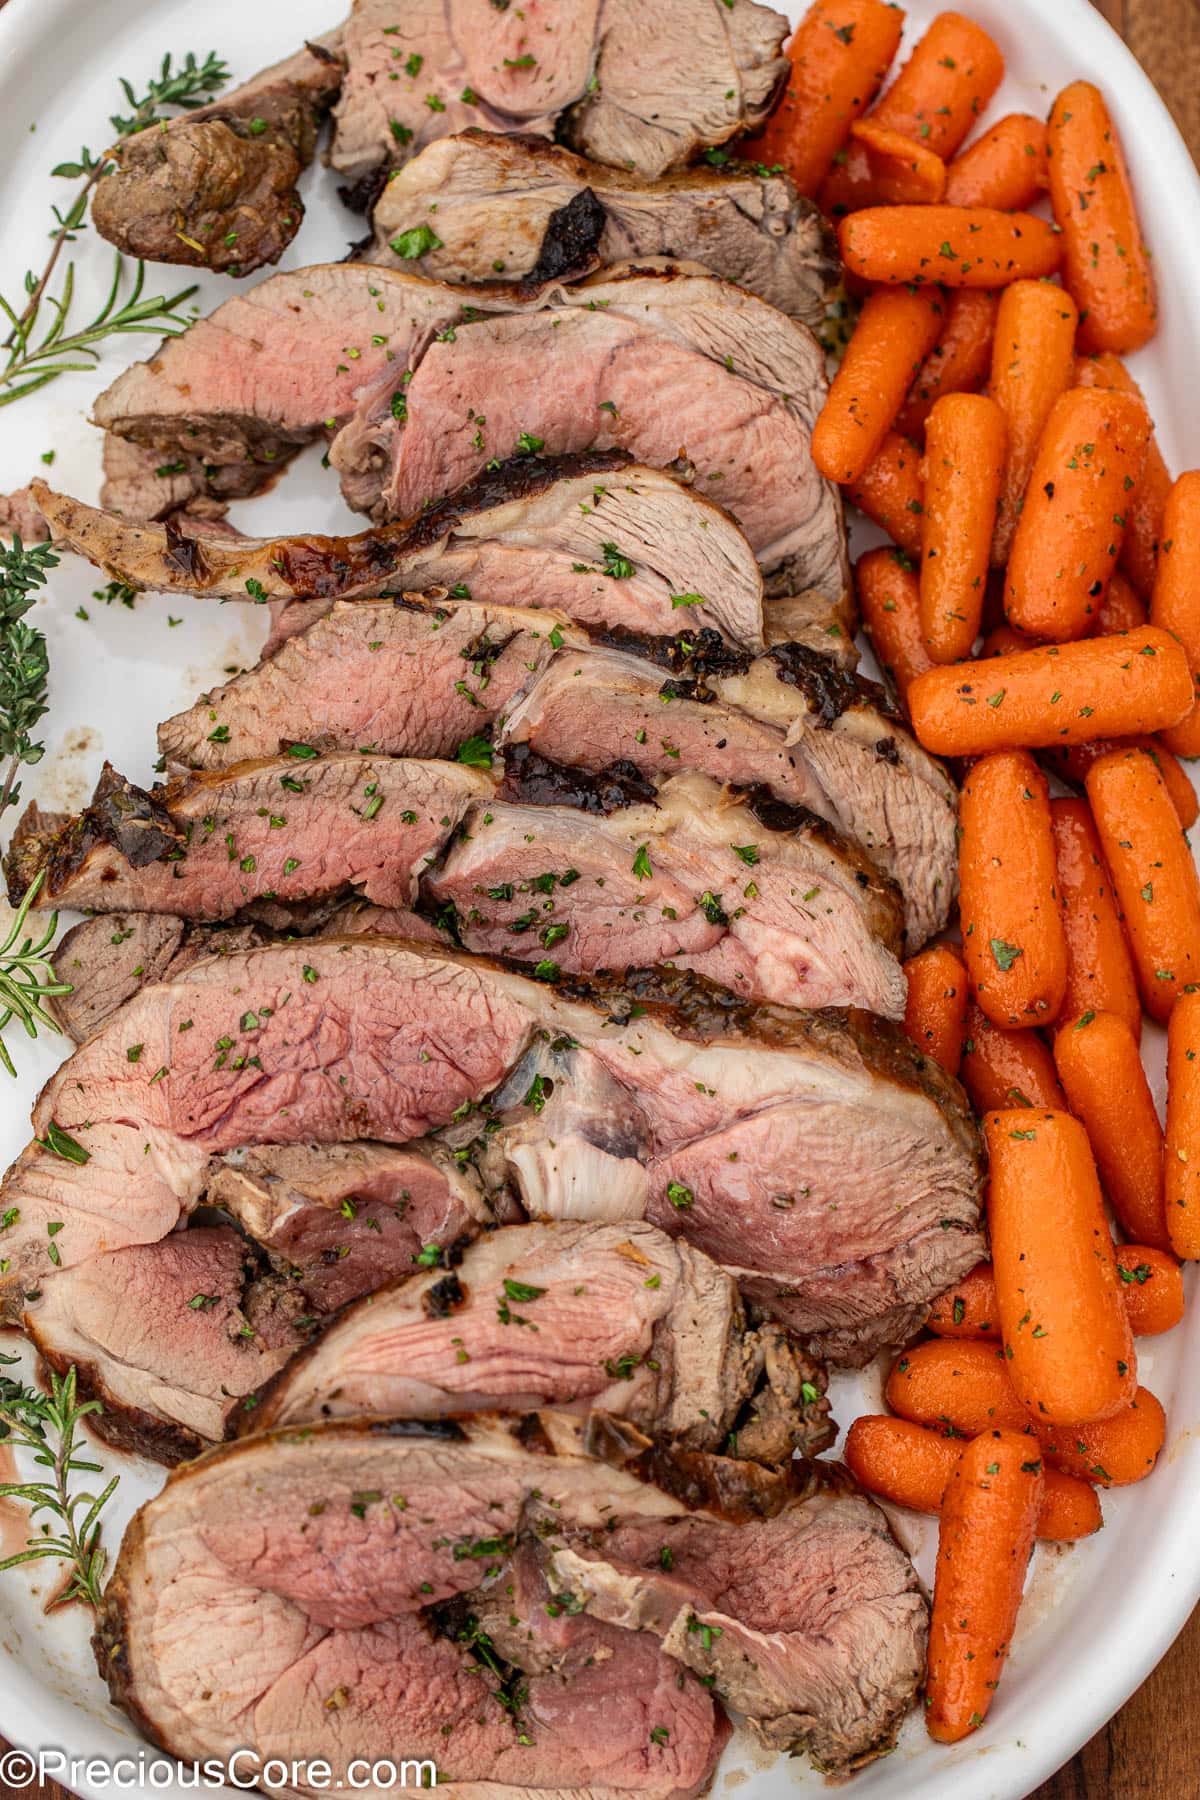 Tasty lamb on a serving platter with glazed carrots.